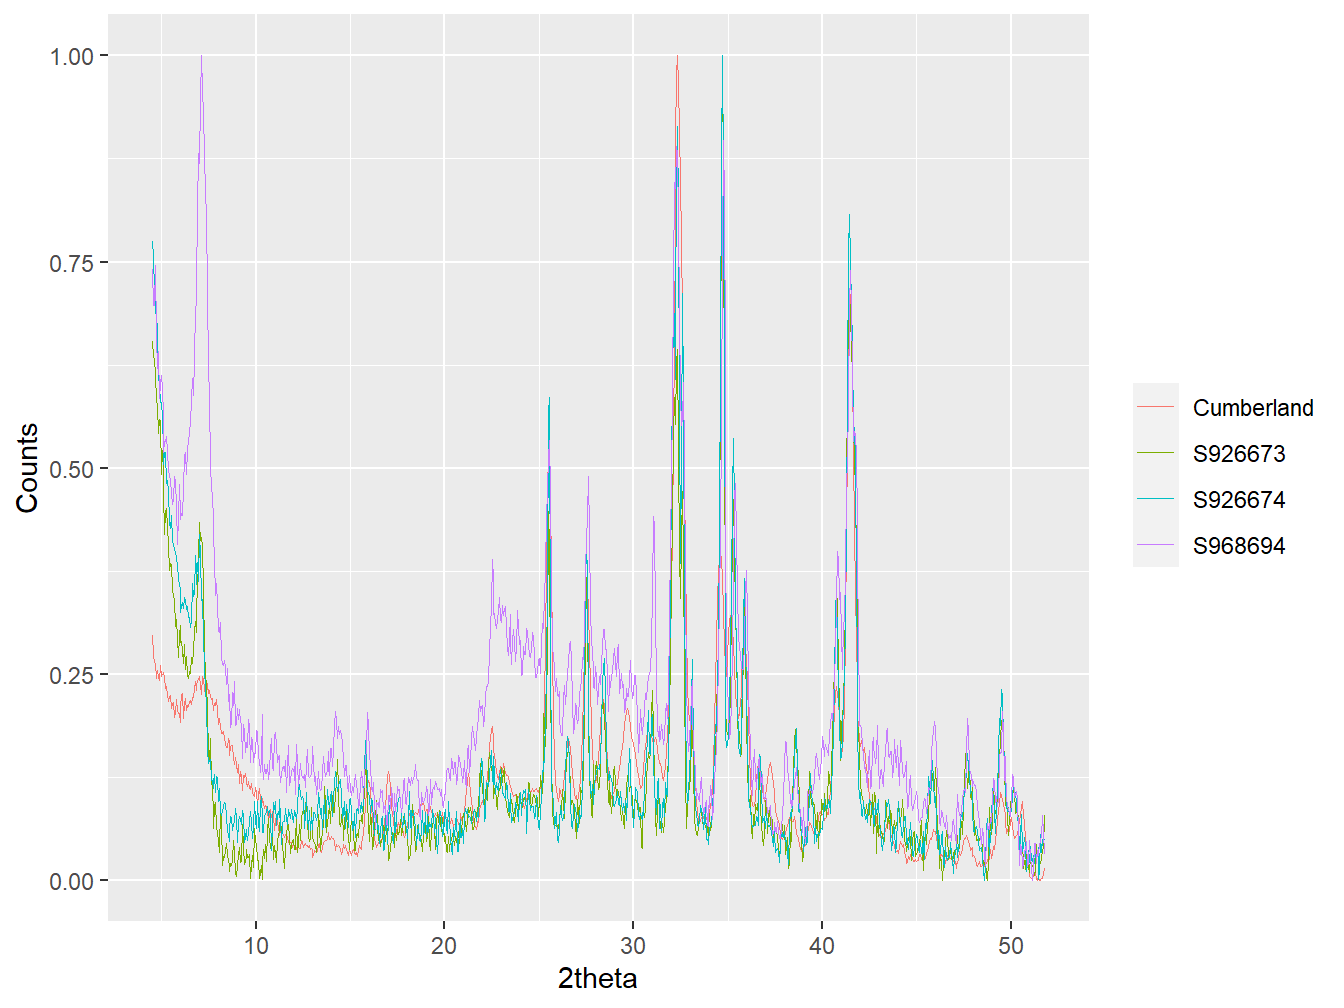 Diffractogram from the Cumberland site plotted against 3 diffractograms from Scotland identified as having relatively high correlation to the Martian data.